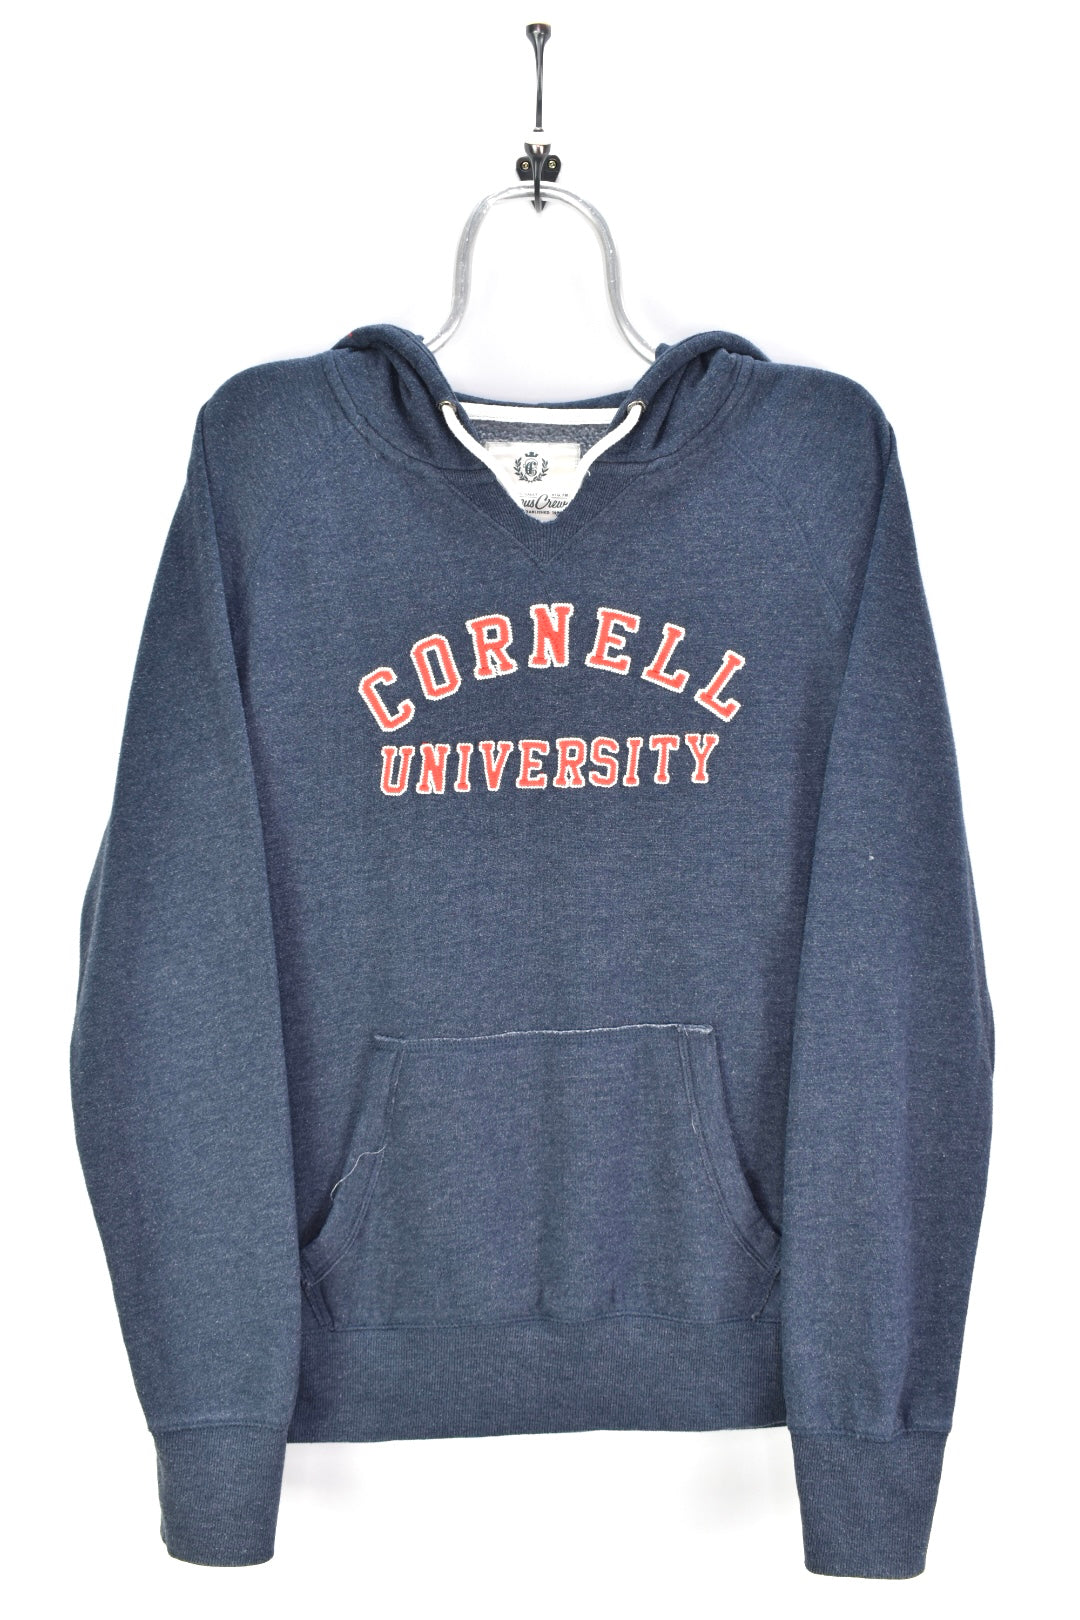 VINTAGE WOMEN'S CORNELL UNIVERSITY EMBROIDERED HOODIE | LARGE COLLEGE